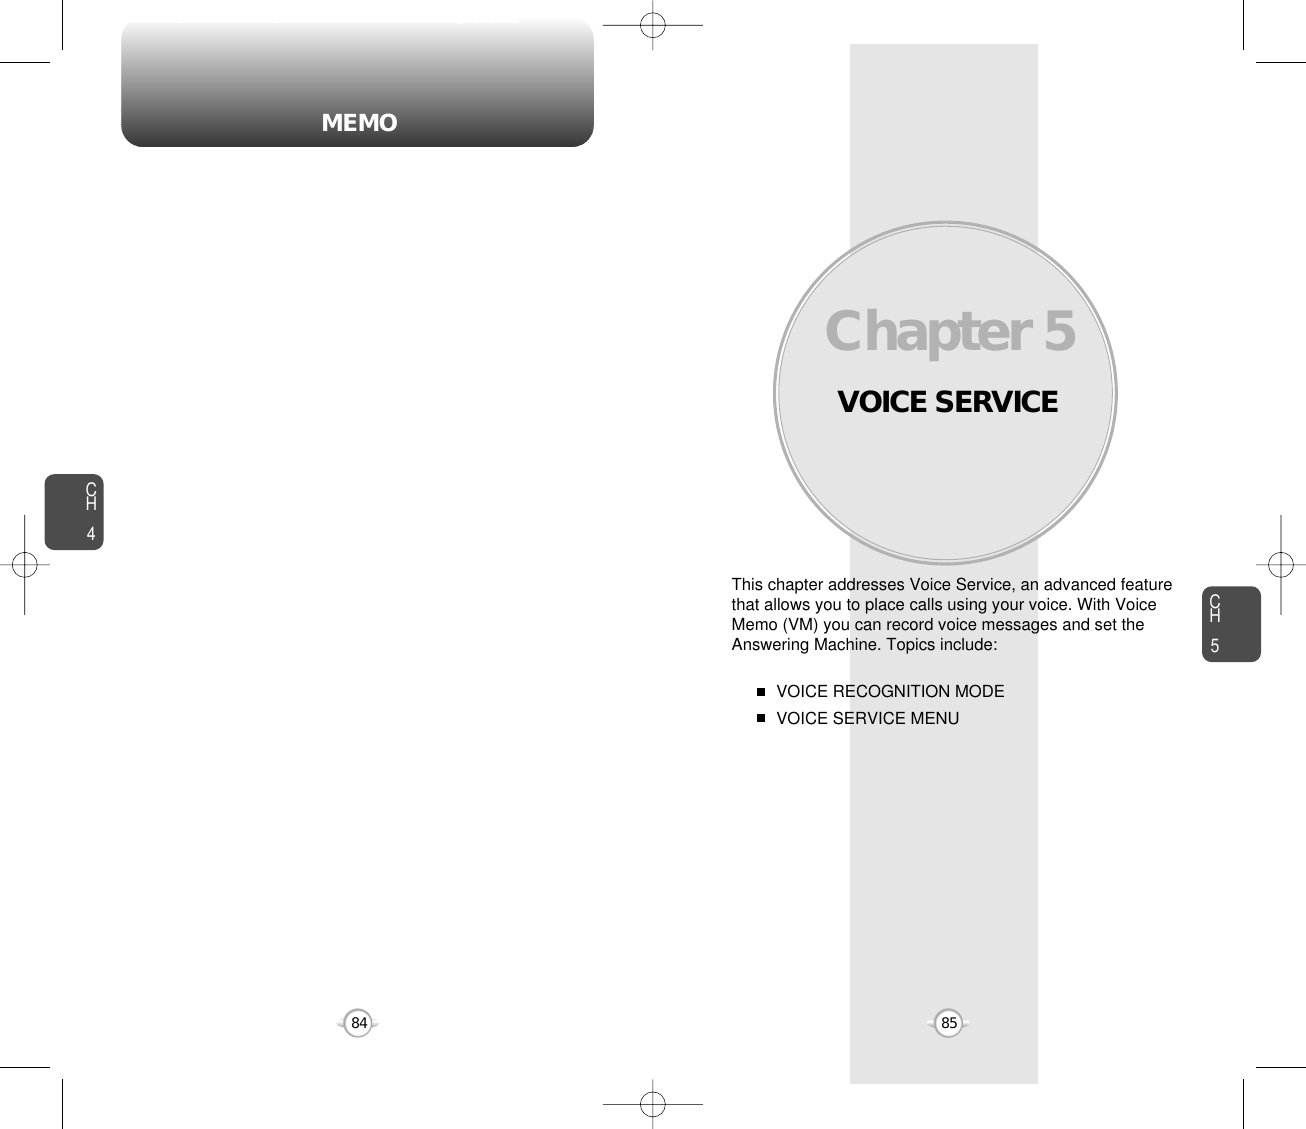 VOICE SERVICEThis chapter addresses Voice Service, an advanced featurethat allows you to place calls using your voice. With VoiceMemo (VM) you can record voice messages and set theAnswering Machine. Topics include:VOICE RECOGNITION MODEVOICE SERVICE MENU Chapter 58584CH585CH4MEMO